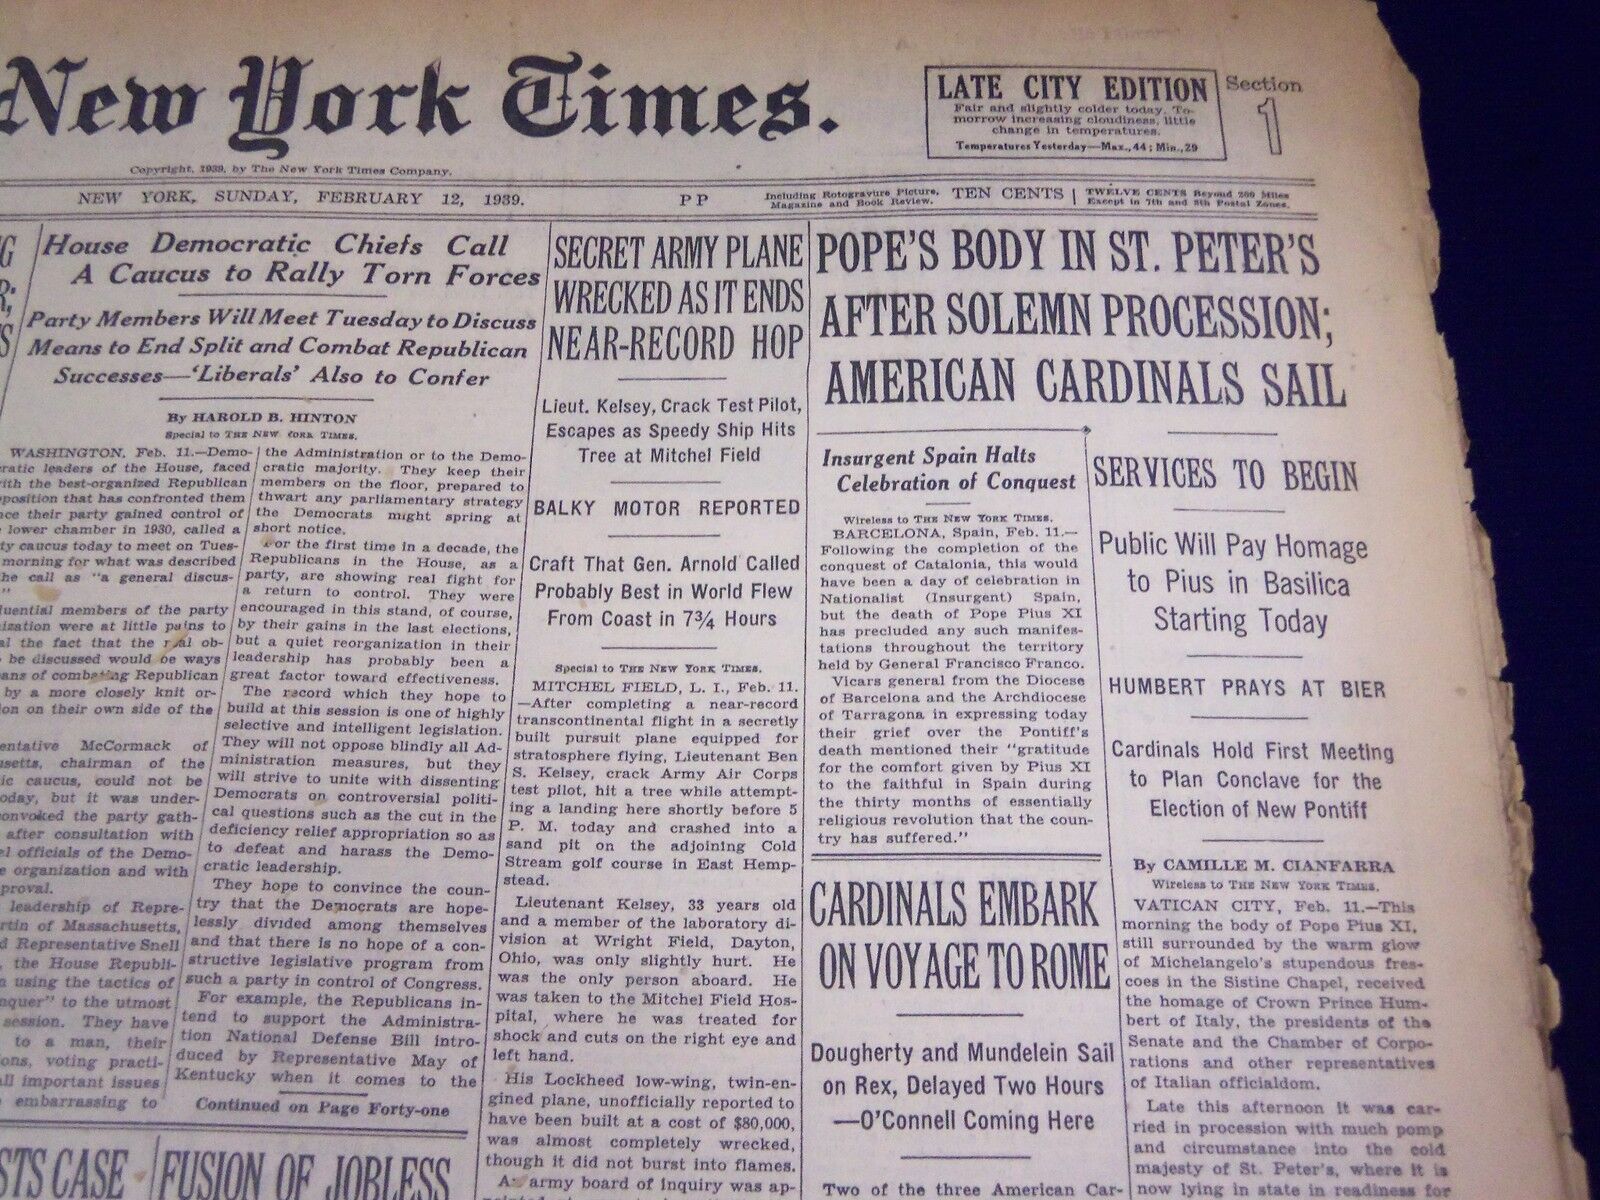 1939 FEB 12 NEW YORK TIMES - POPE'S BODY IN ST. PETER'S AFTER SOLEMN - NT 591